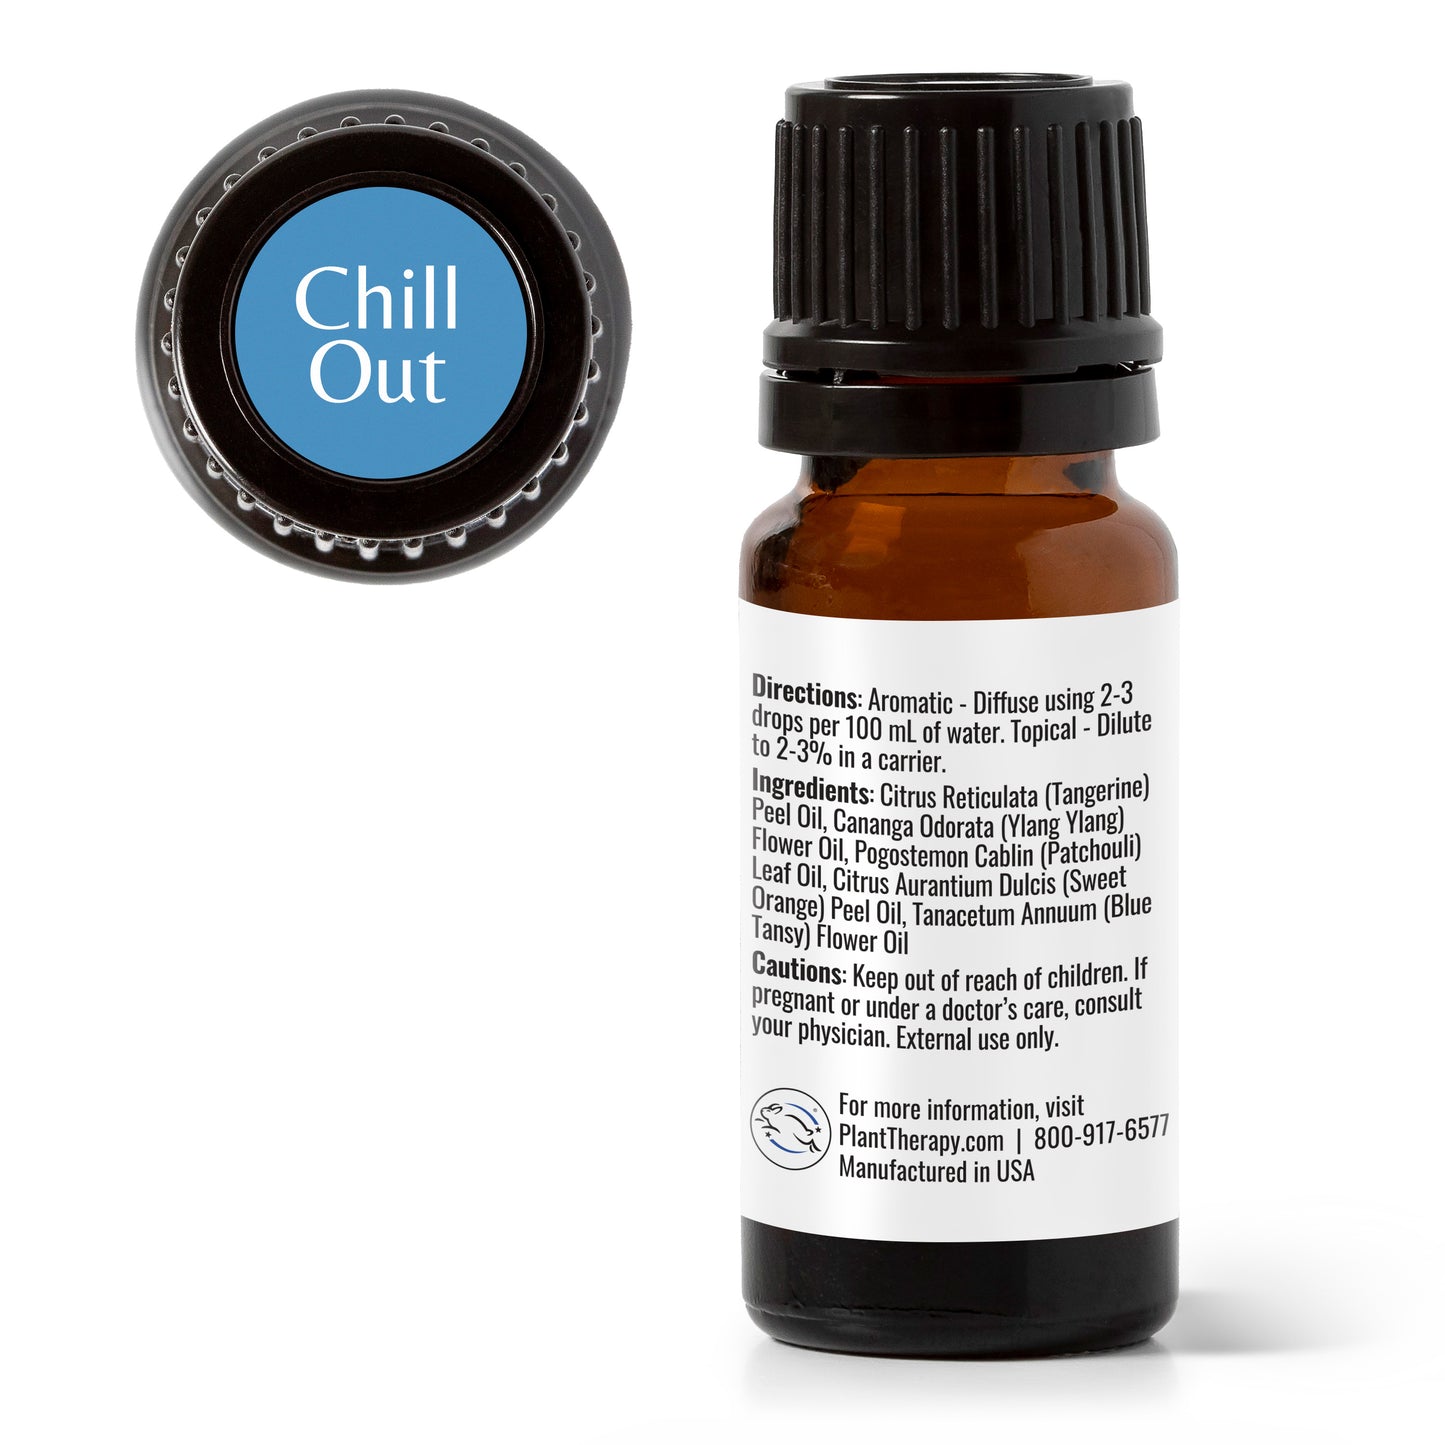 Chill Out Essential Oil Blend back label